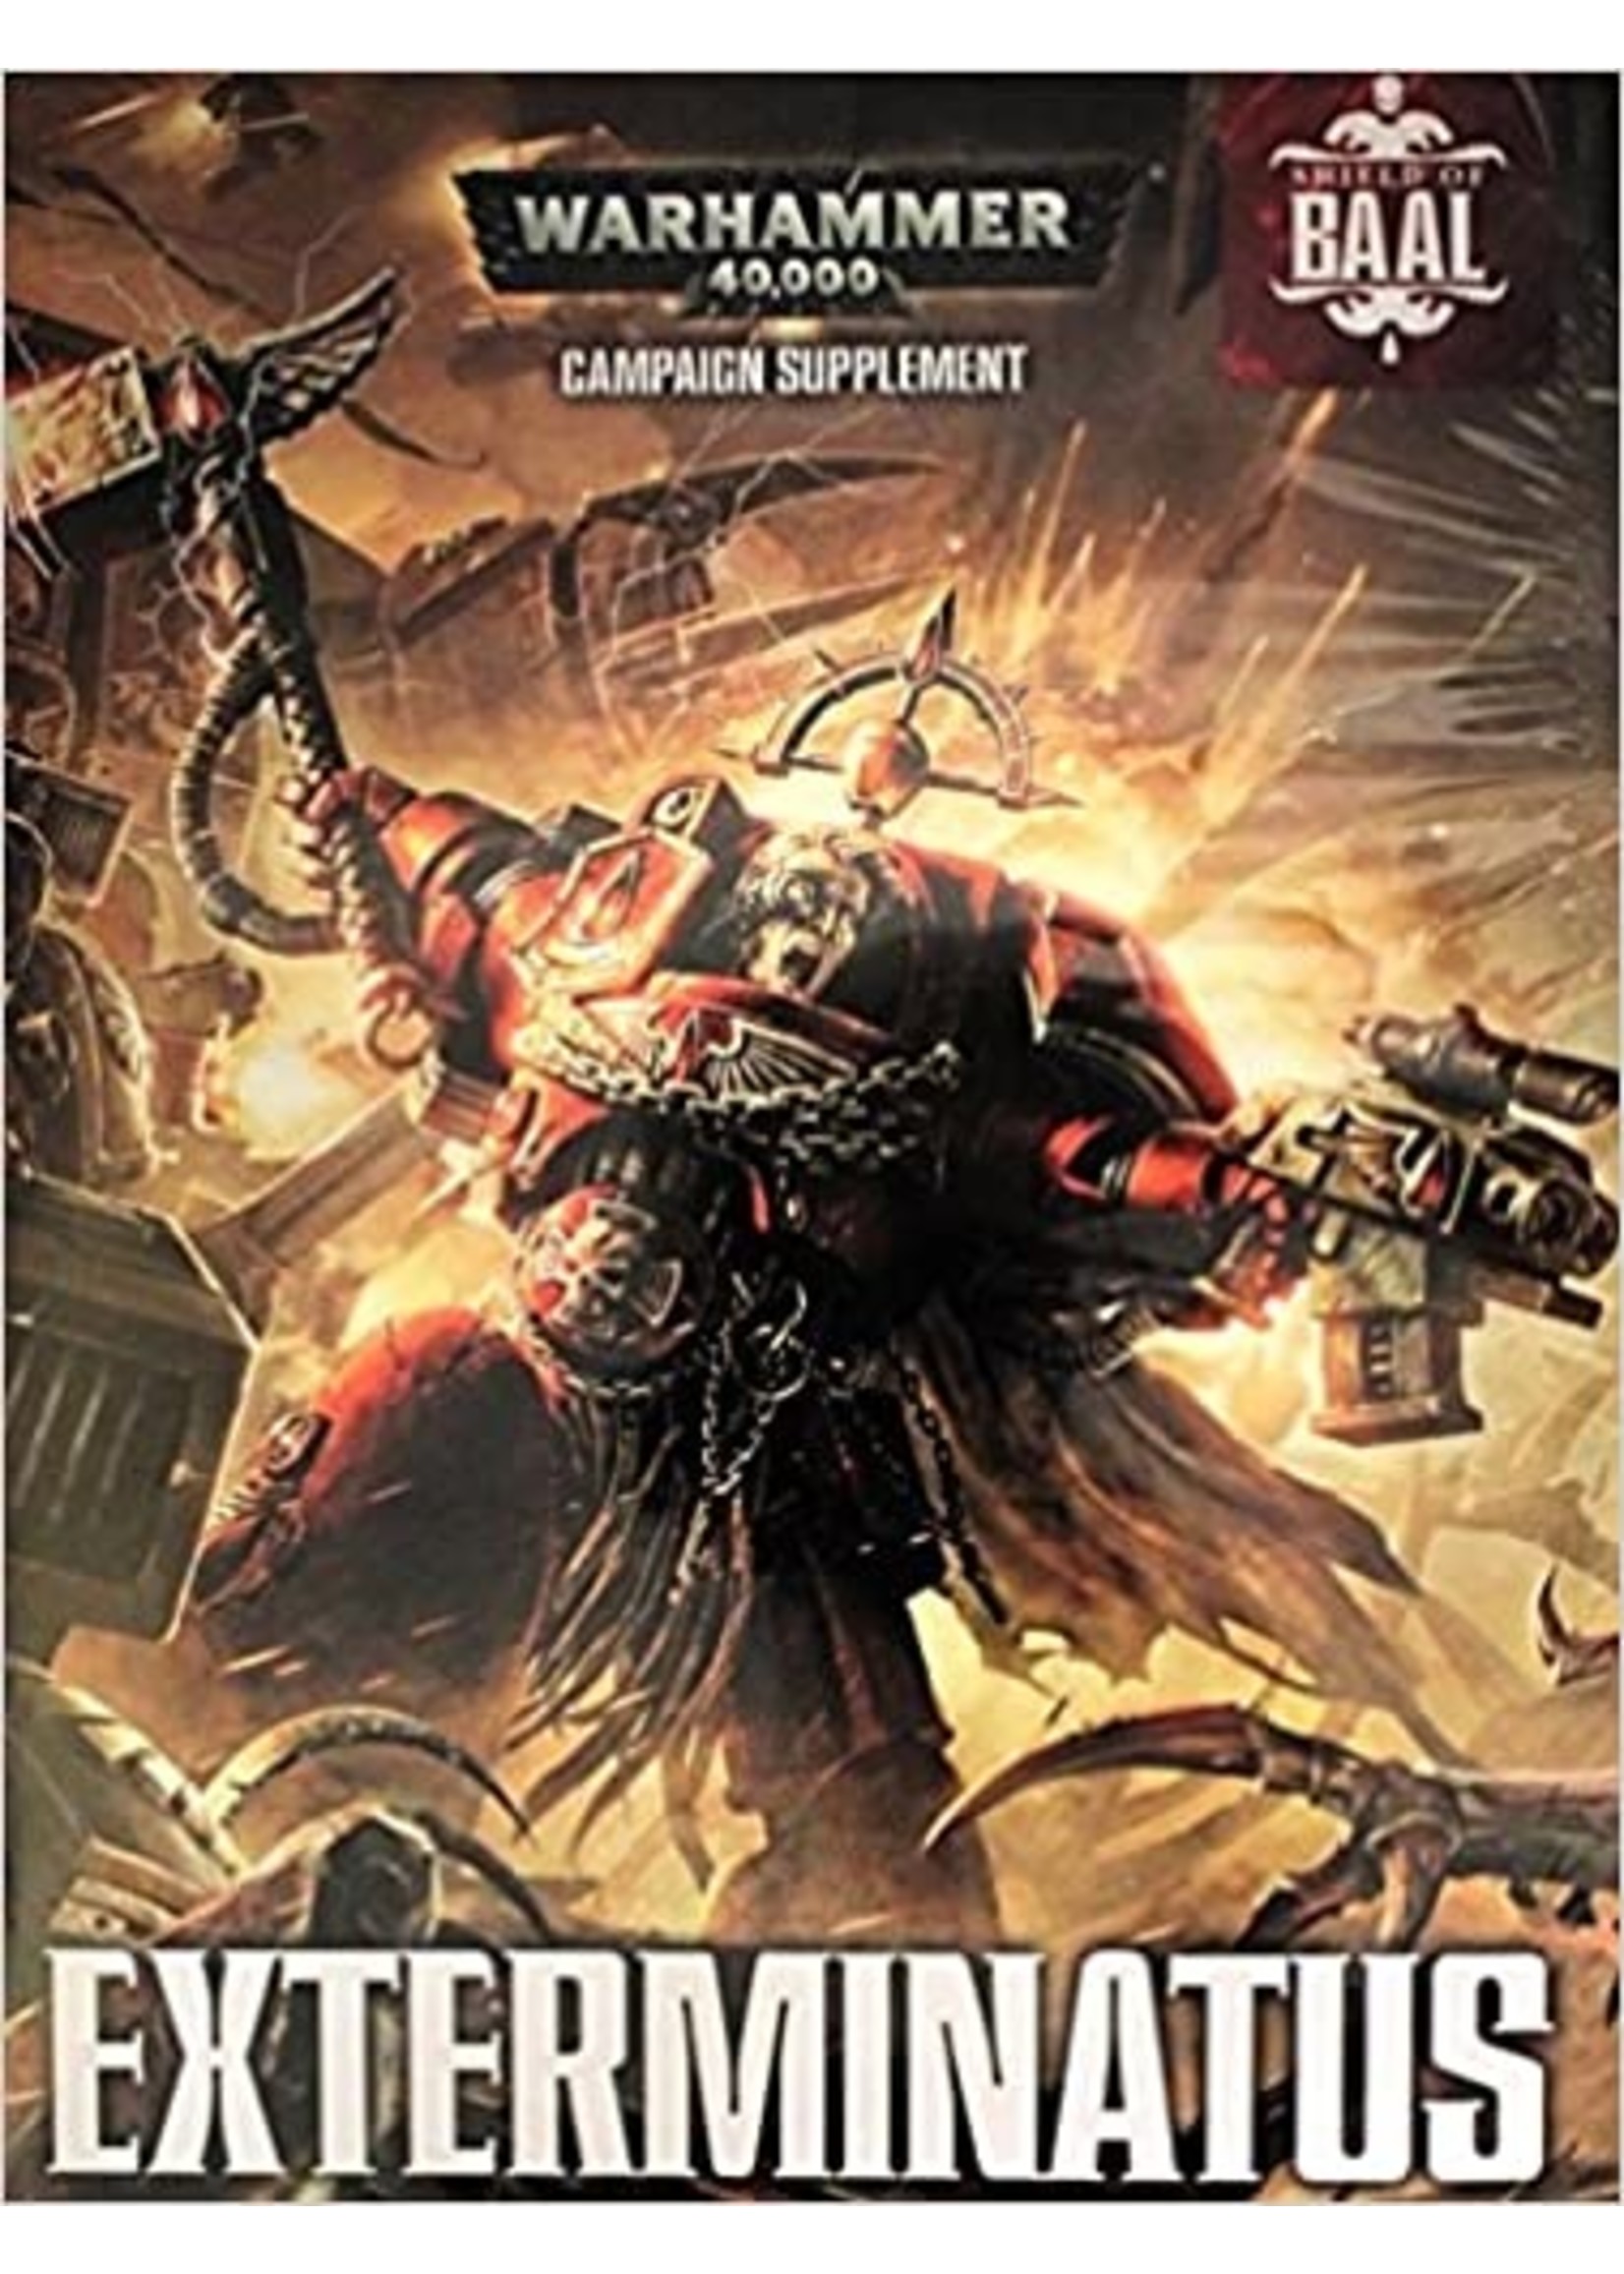 Warhammer 40K: Shield of Baal Exterminatus Softcover